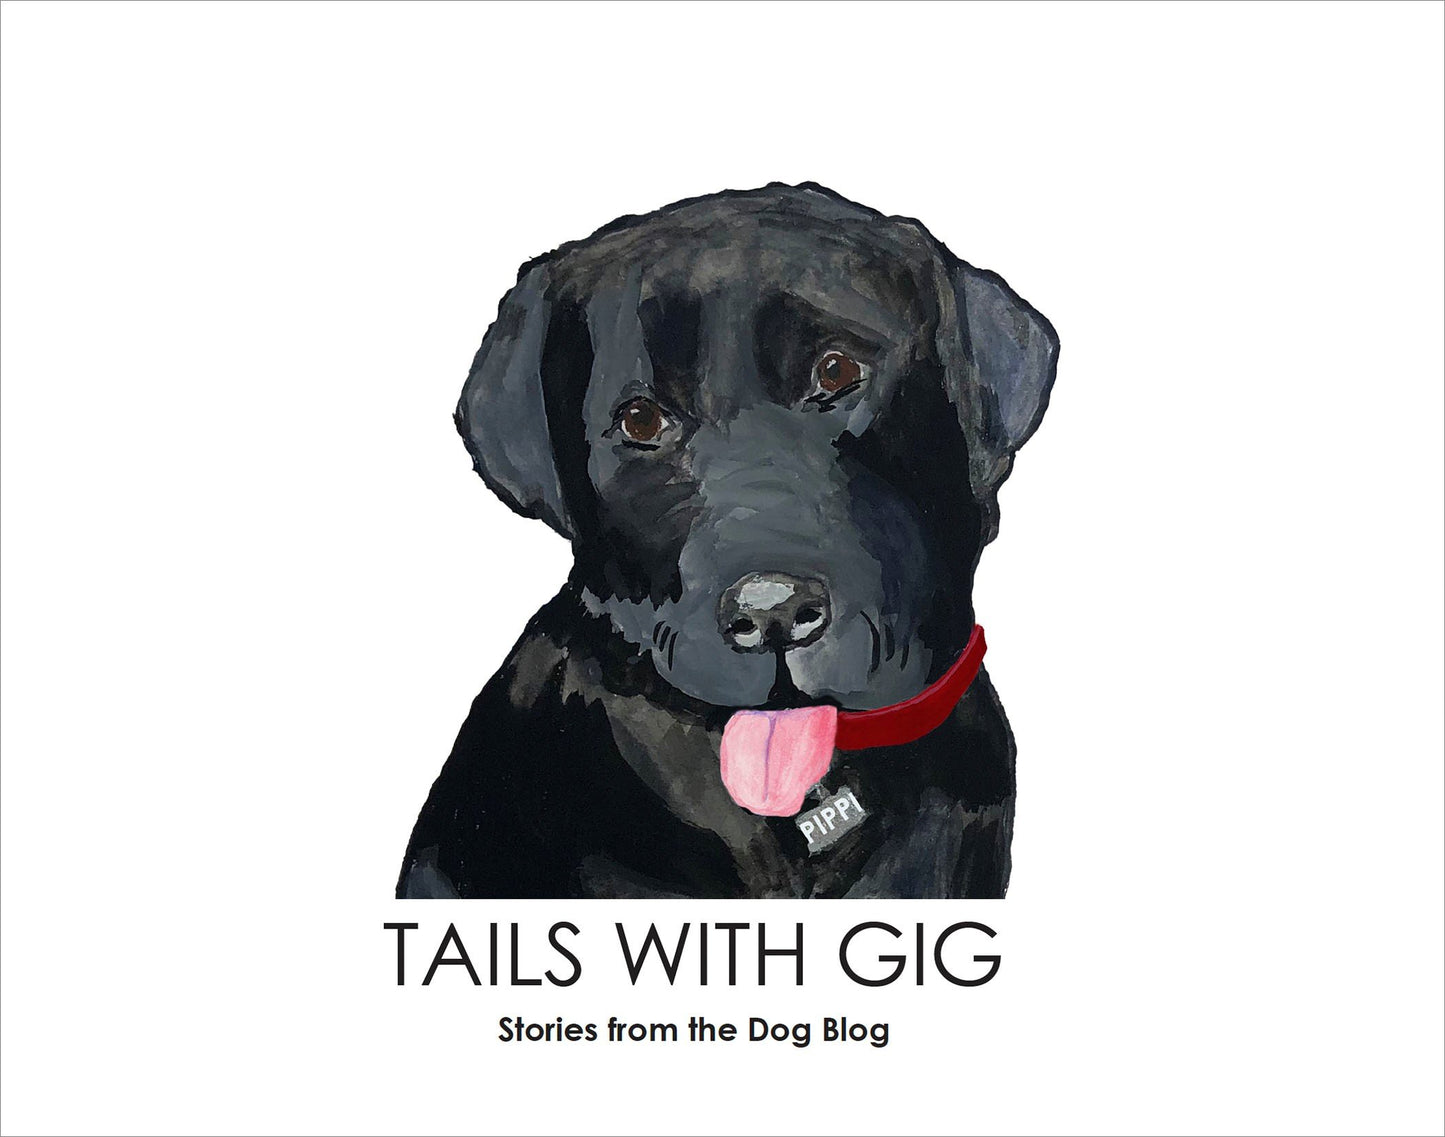 Tails with Gig: Stories from the Dog Blog